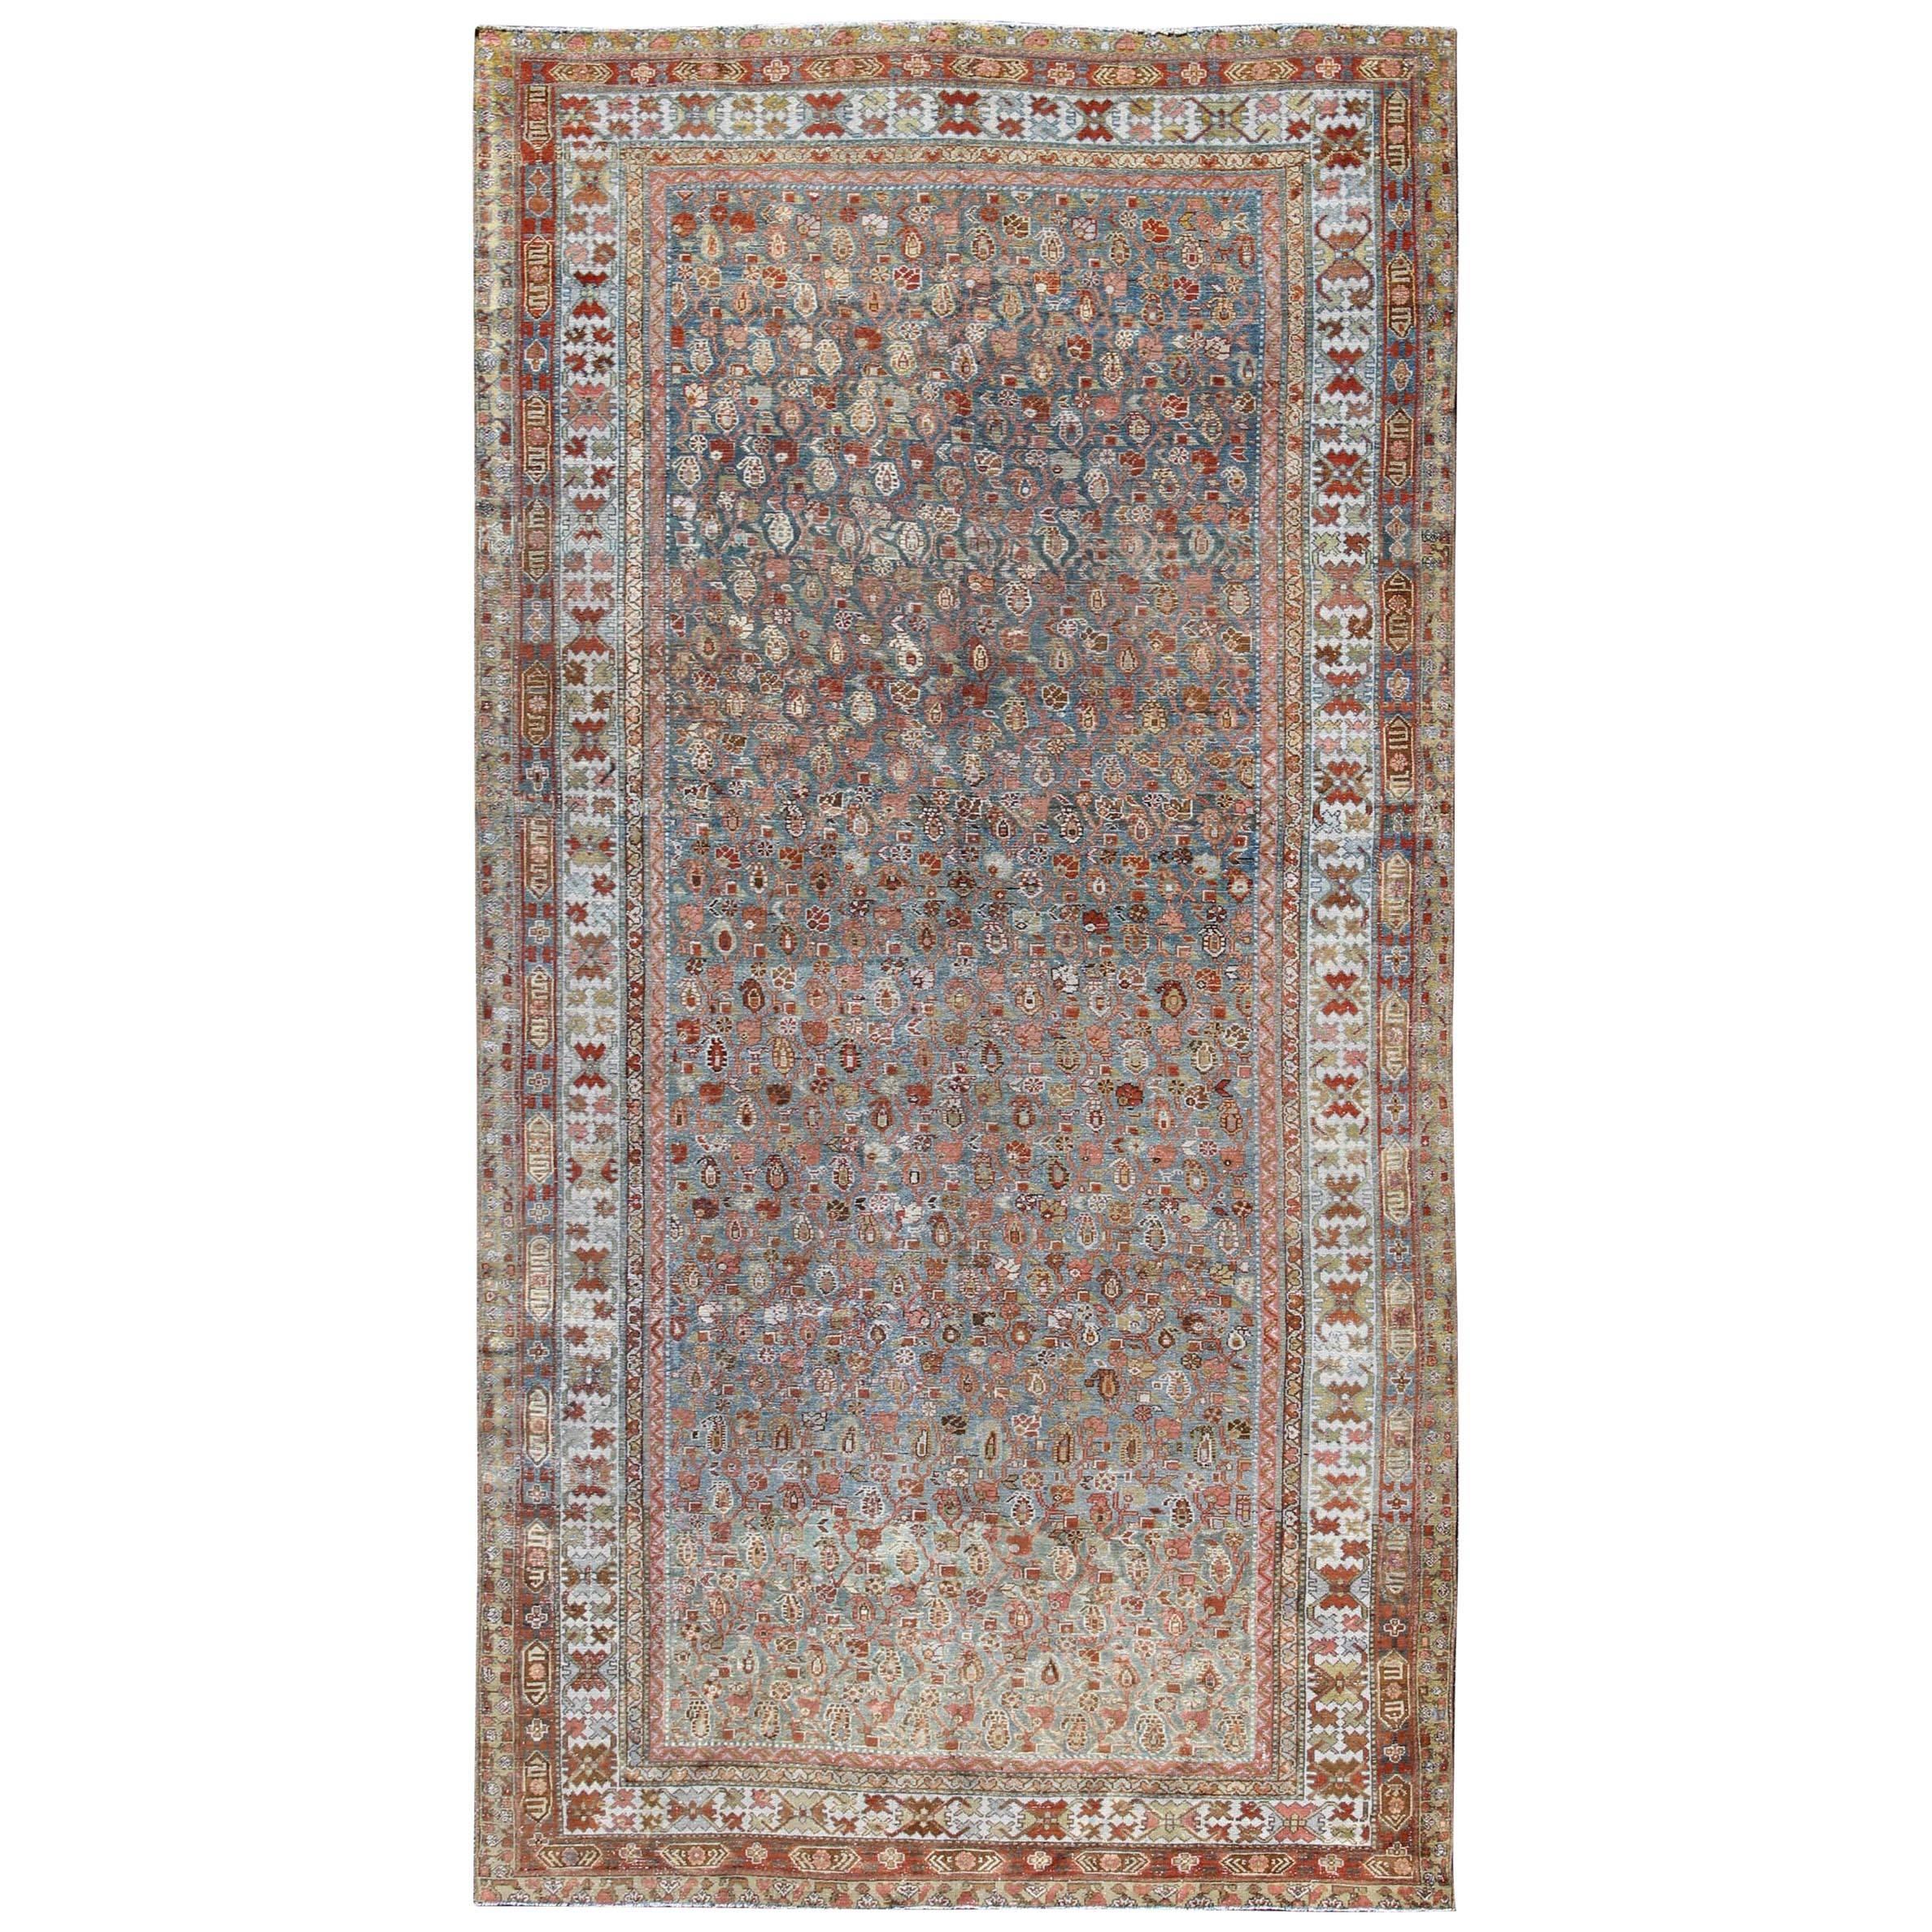 Antique Persian Malayer Rug with All-Over Design in Gray, Blue, Red & Ivory